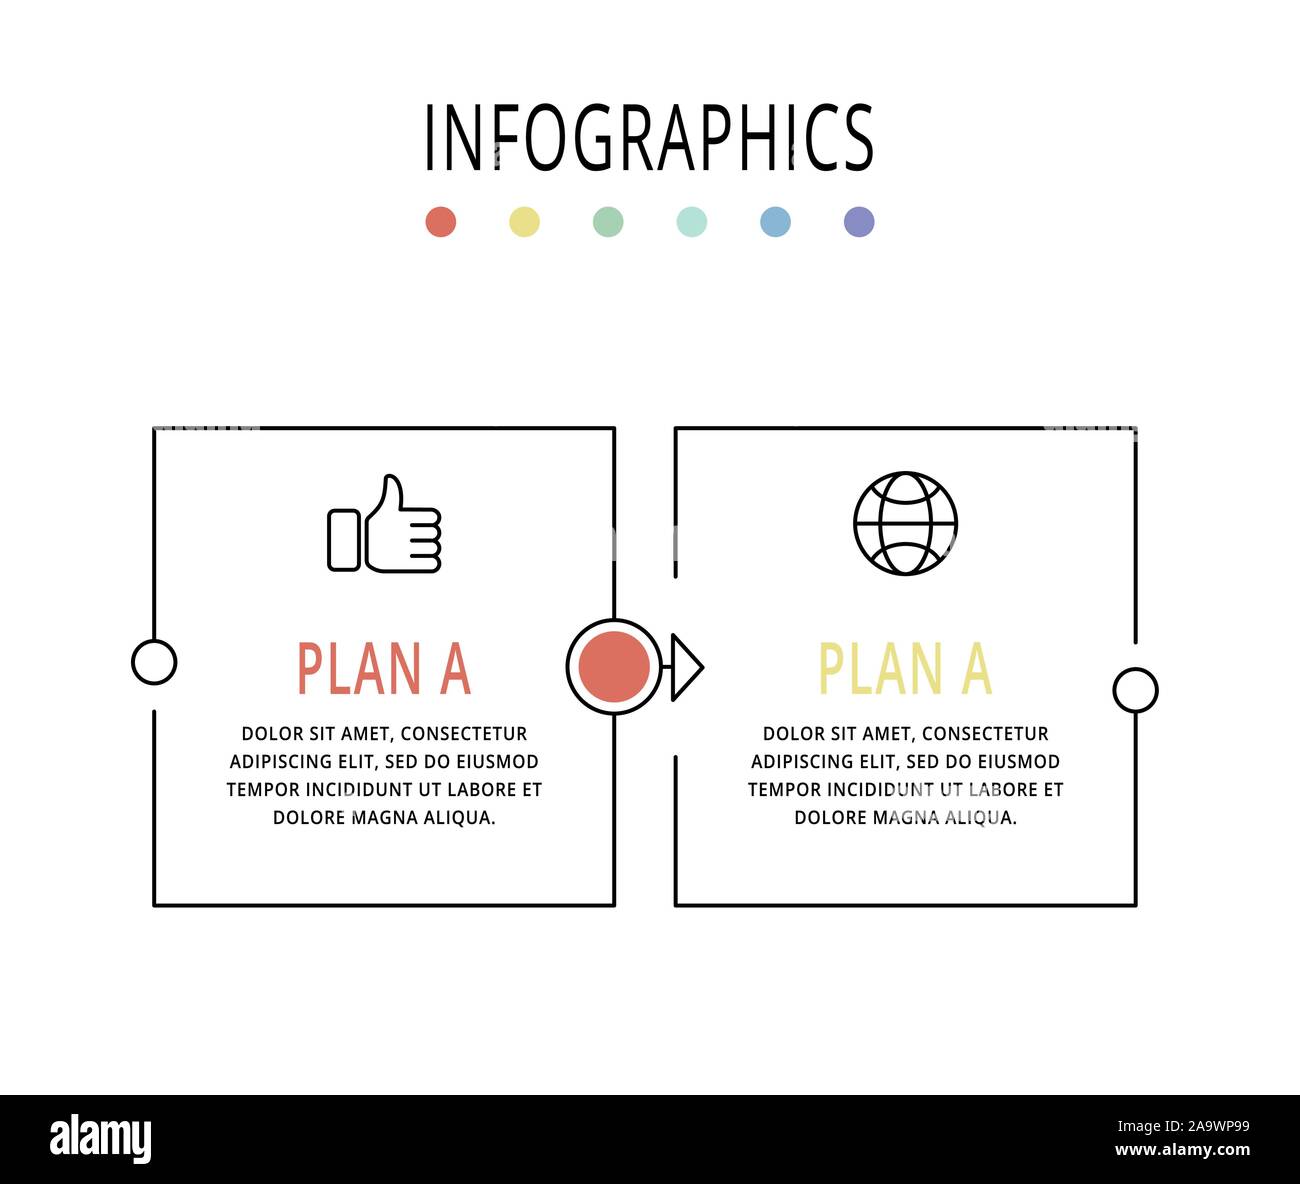 Vector Infographic Template With Rectangles Business Data Visualization With 2 Options And 6417